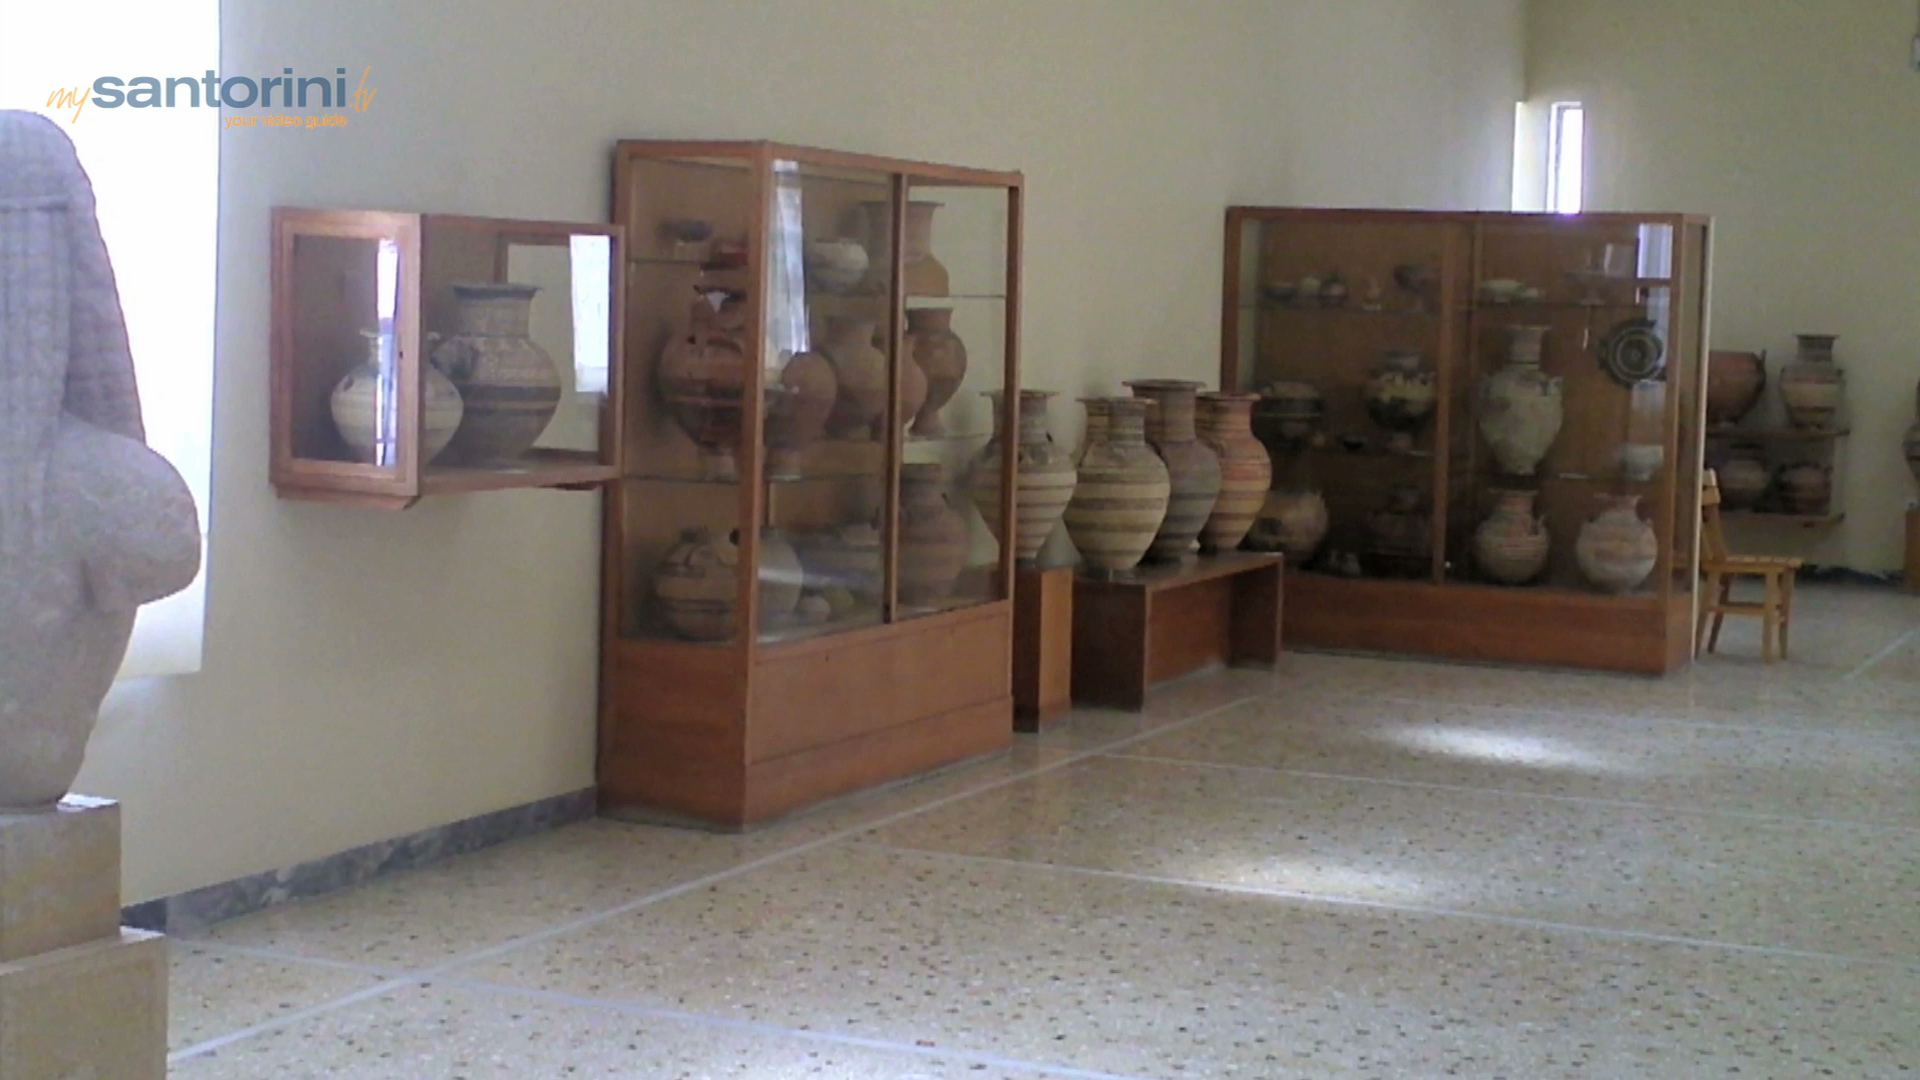 The Archeological Museum